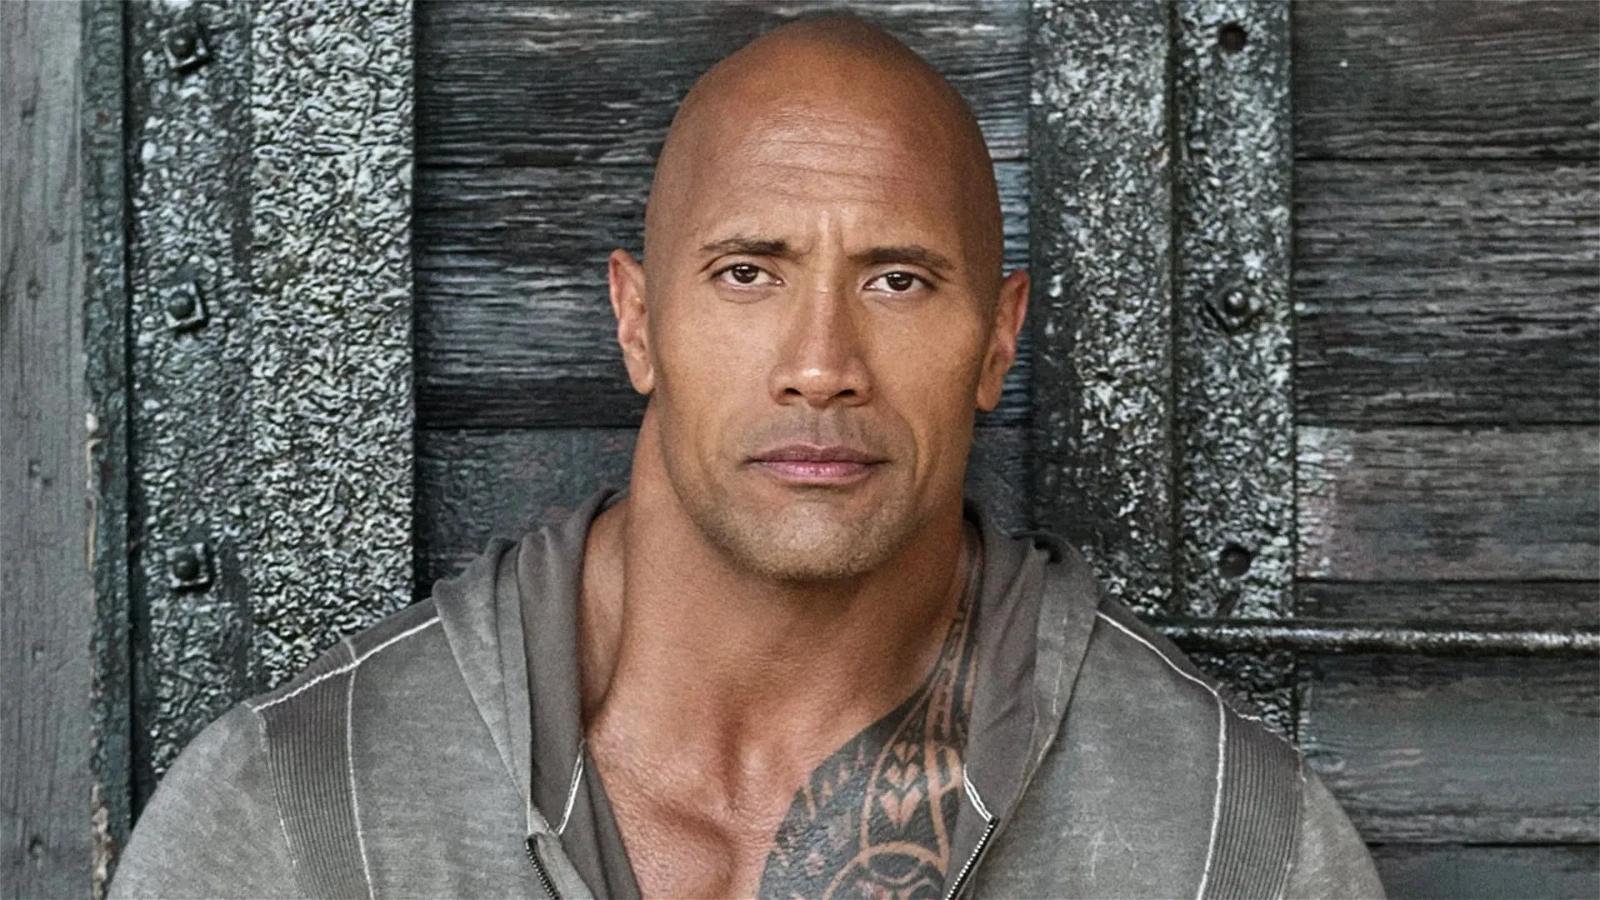 Dwayne Johnson apparently did not smell fresh when kissed by Emily Blunt.